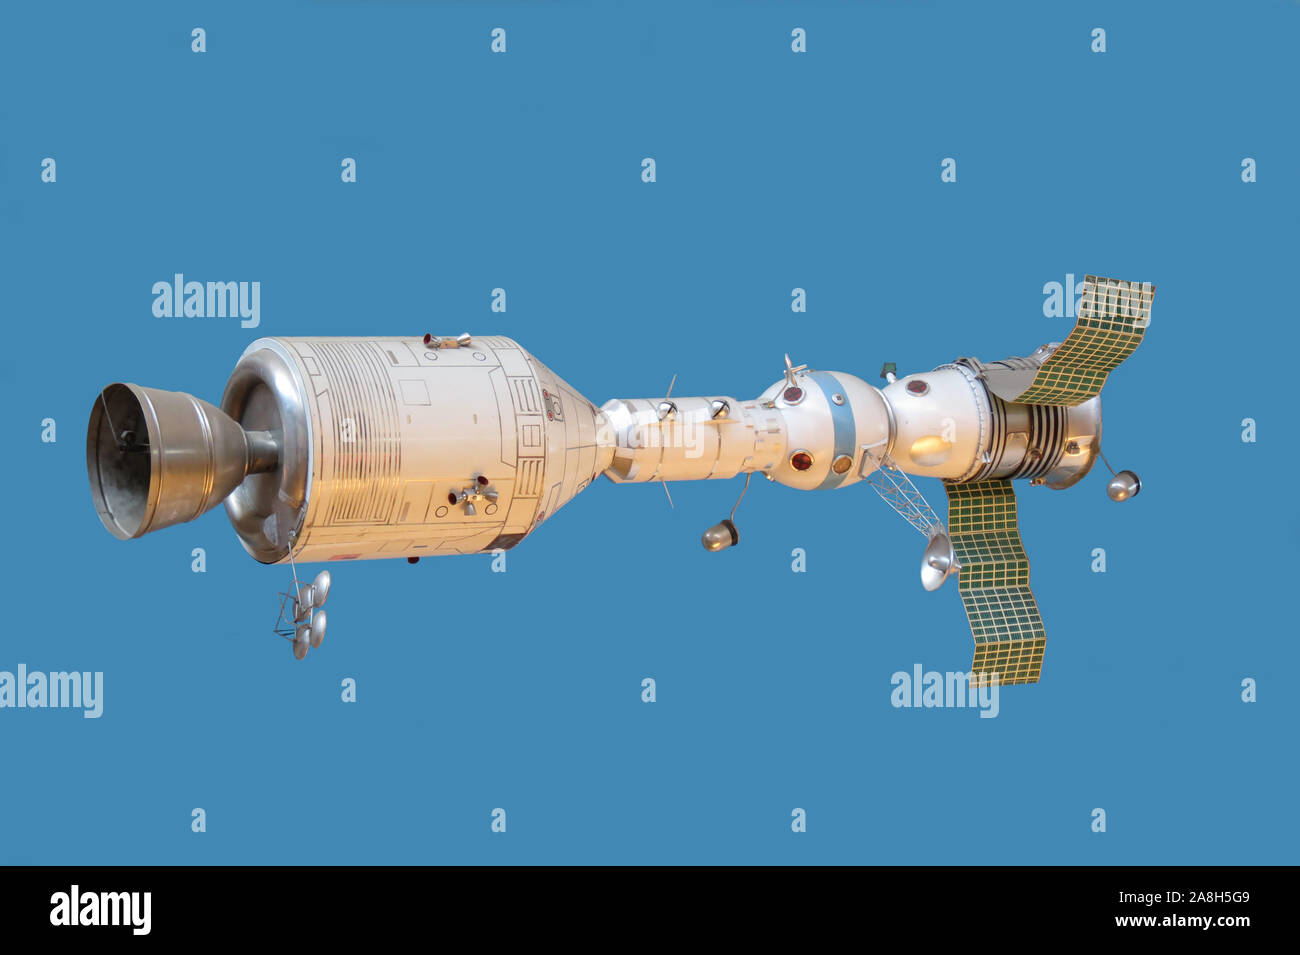 Model connected spaceships Apollo and Soyuz Stock Photo